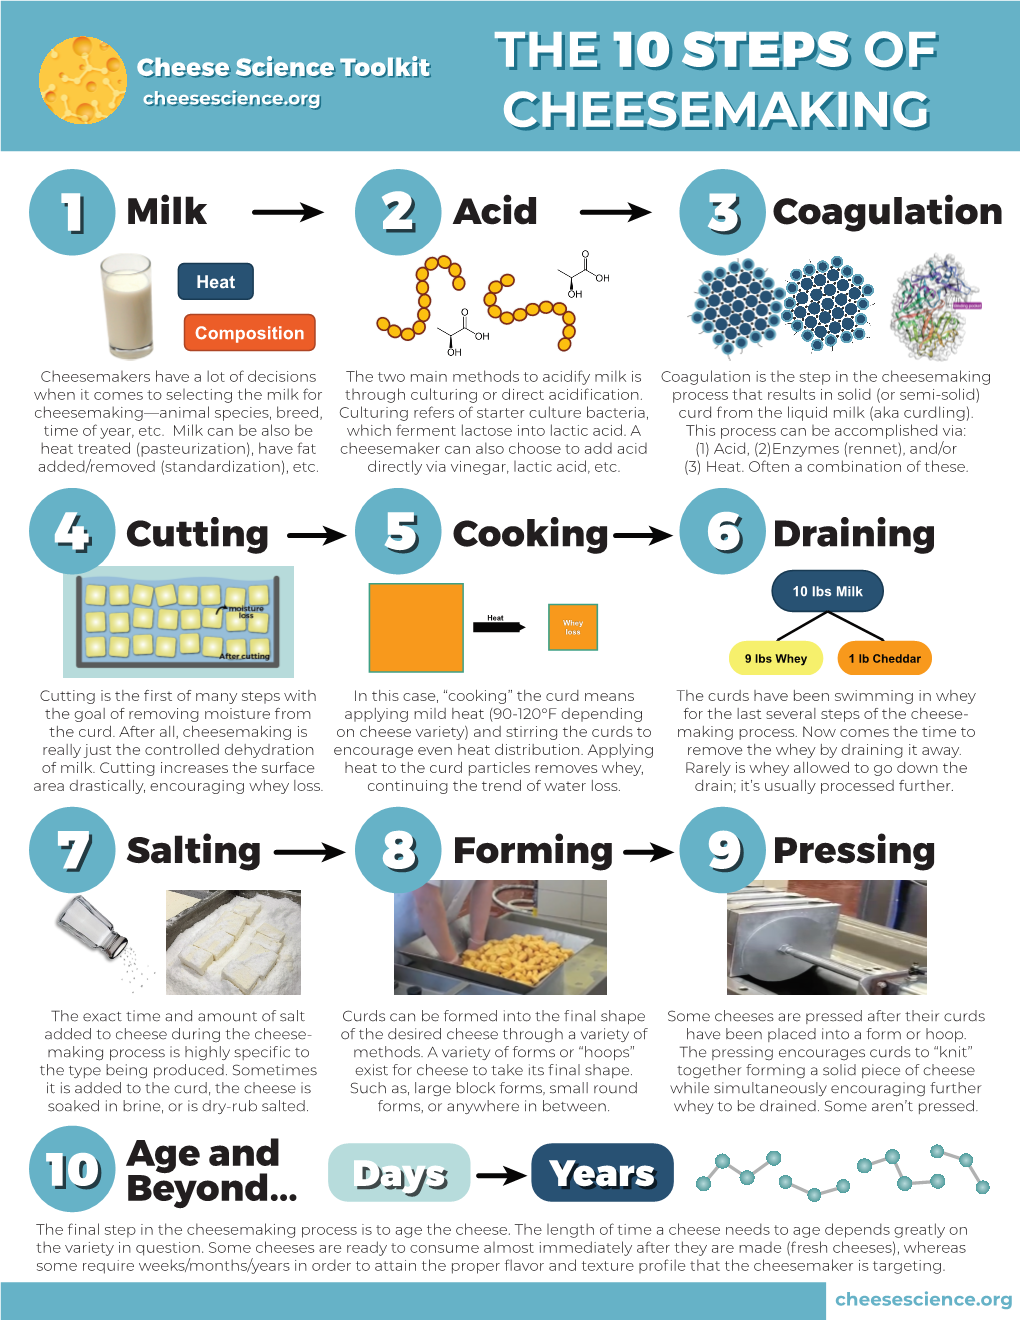 10 Steps of Cheesemaking Infographic